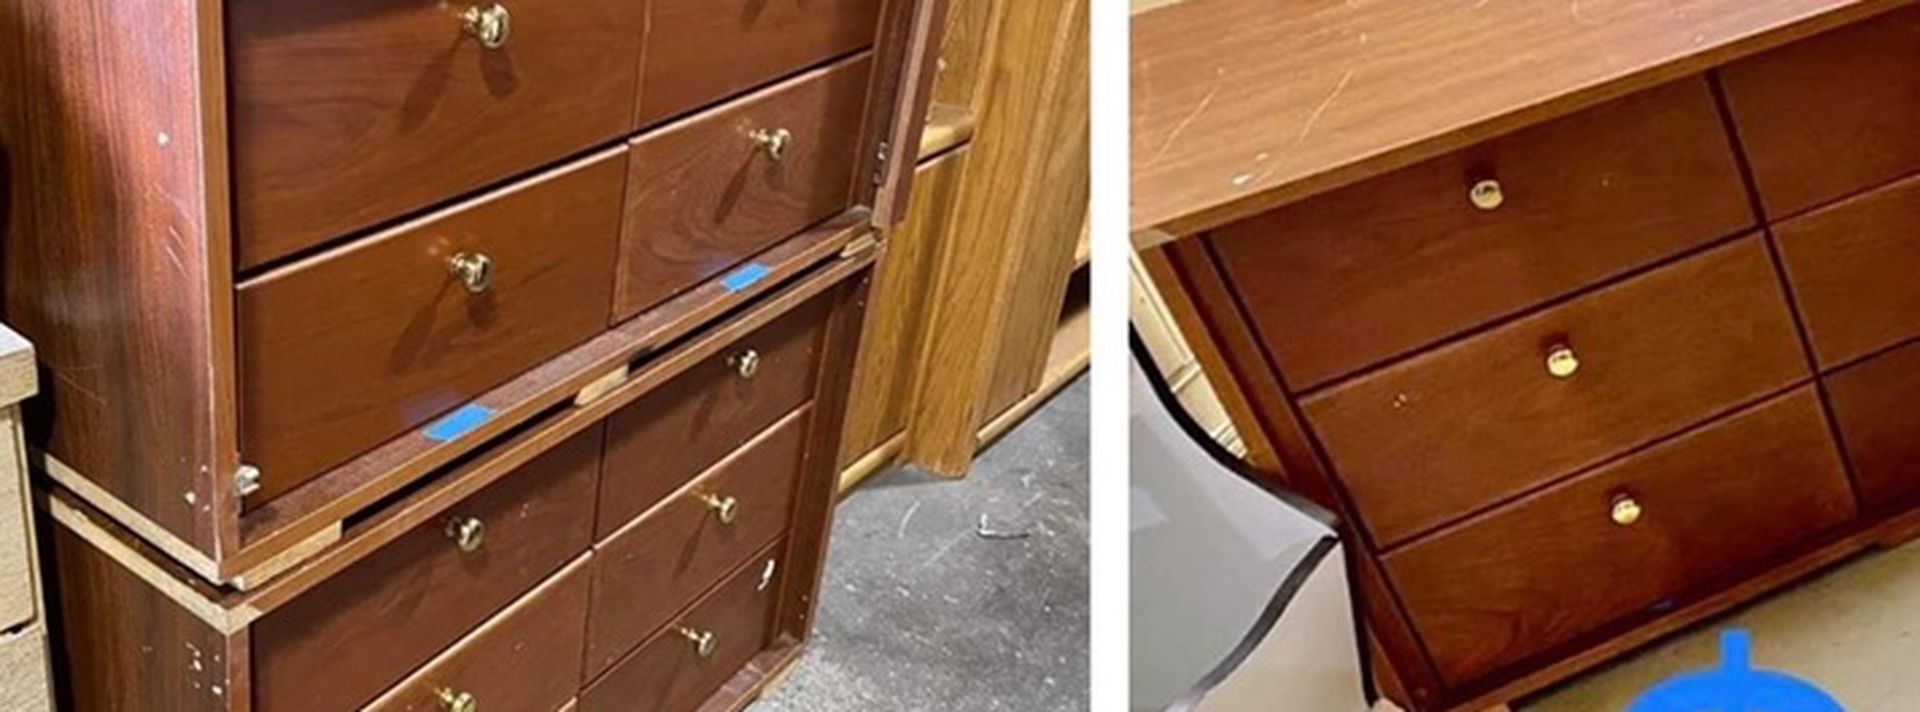 $240 for both together. Bring extra extra muscle to pick up.-Drawers very very heavy- presswood outside and metal drawers similar to a filing cabinet